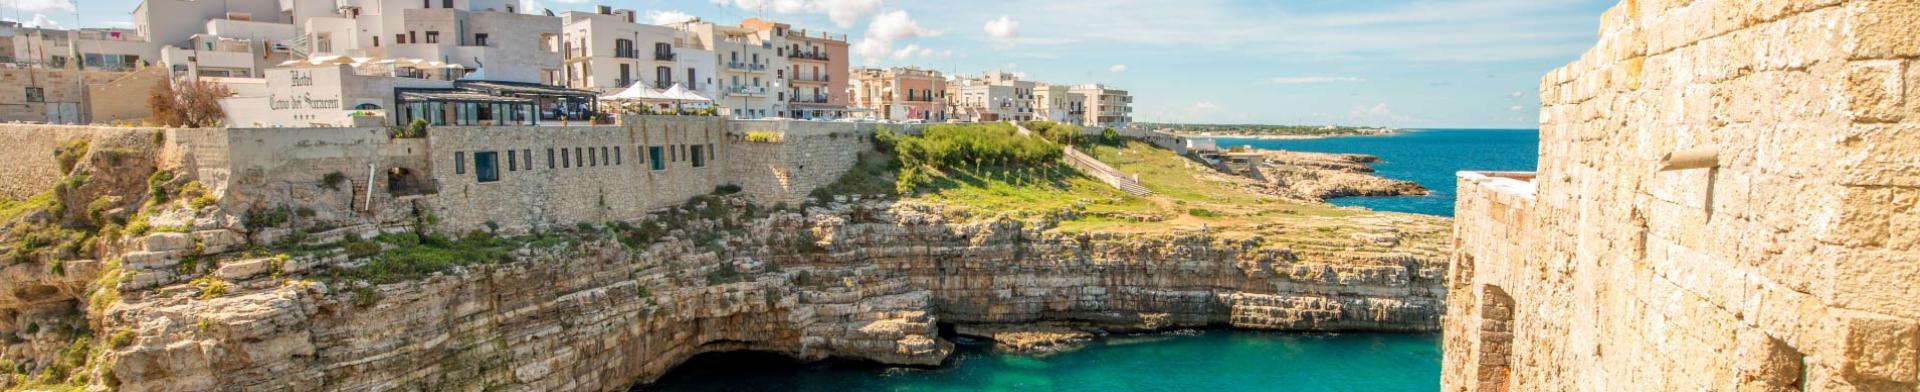 houseatravel it natale-a-polignano-a-mare 005